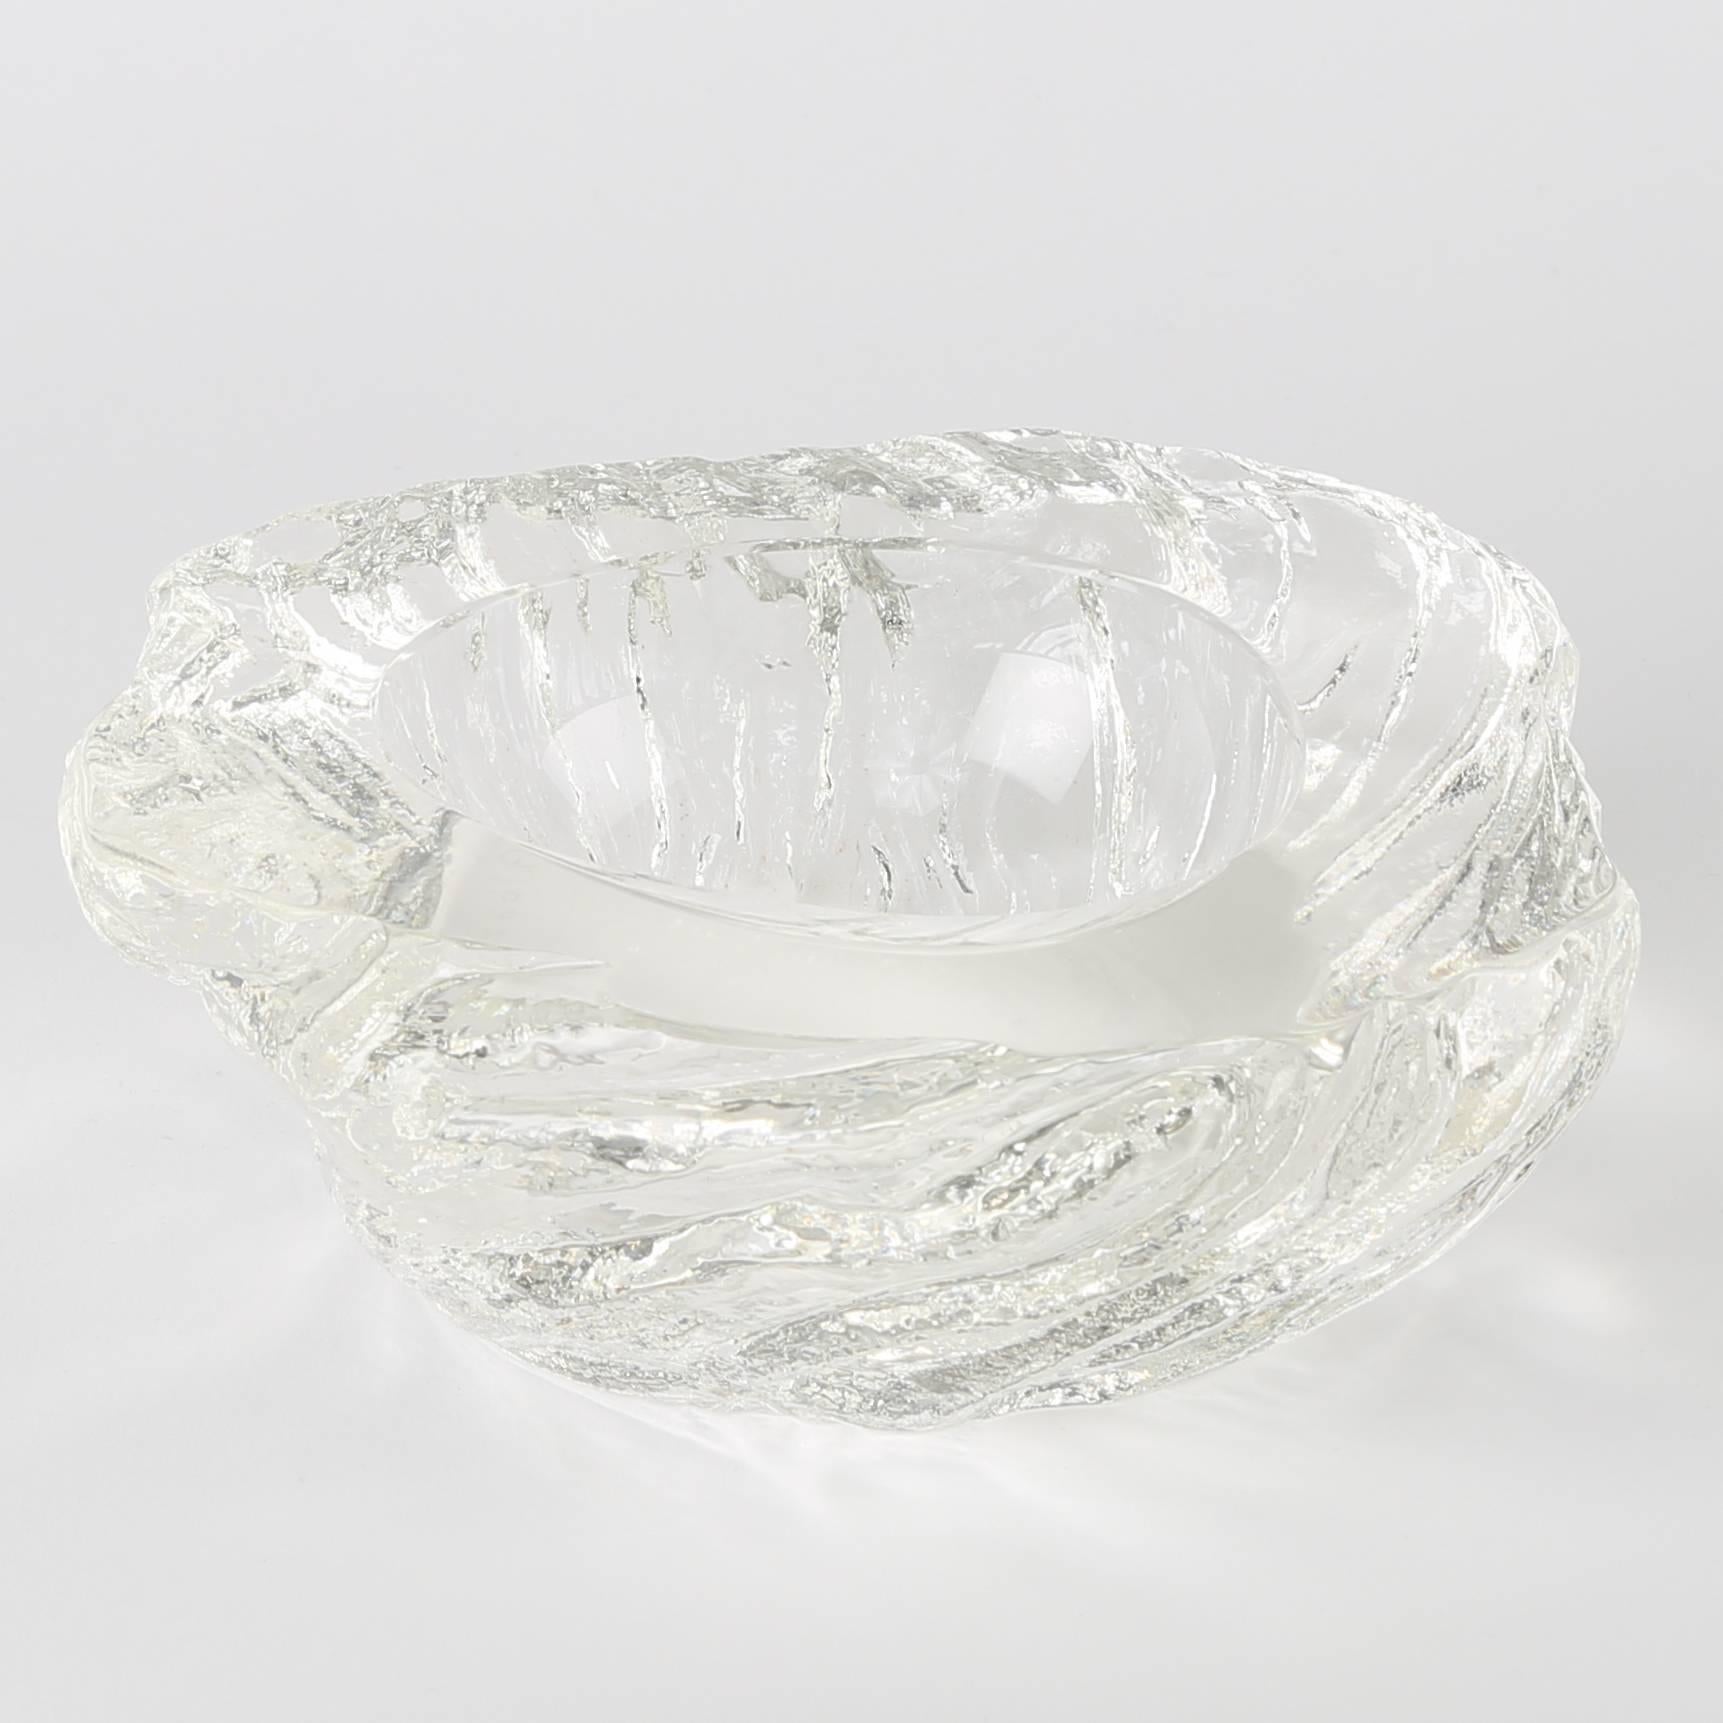 Two handcrafted crystal bowls featuring carved and highly textured exteriors contrasting with smooth interiors and wide flat rims. Large bowl 4